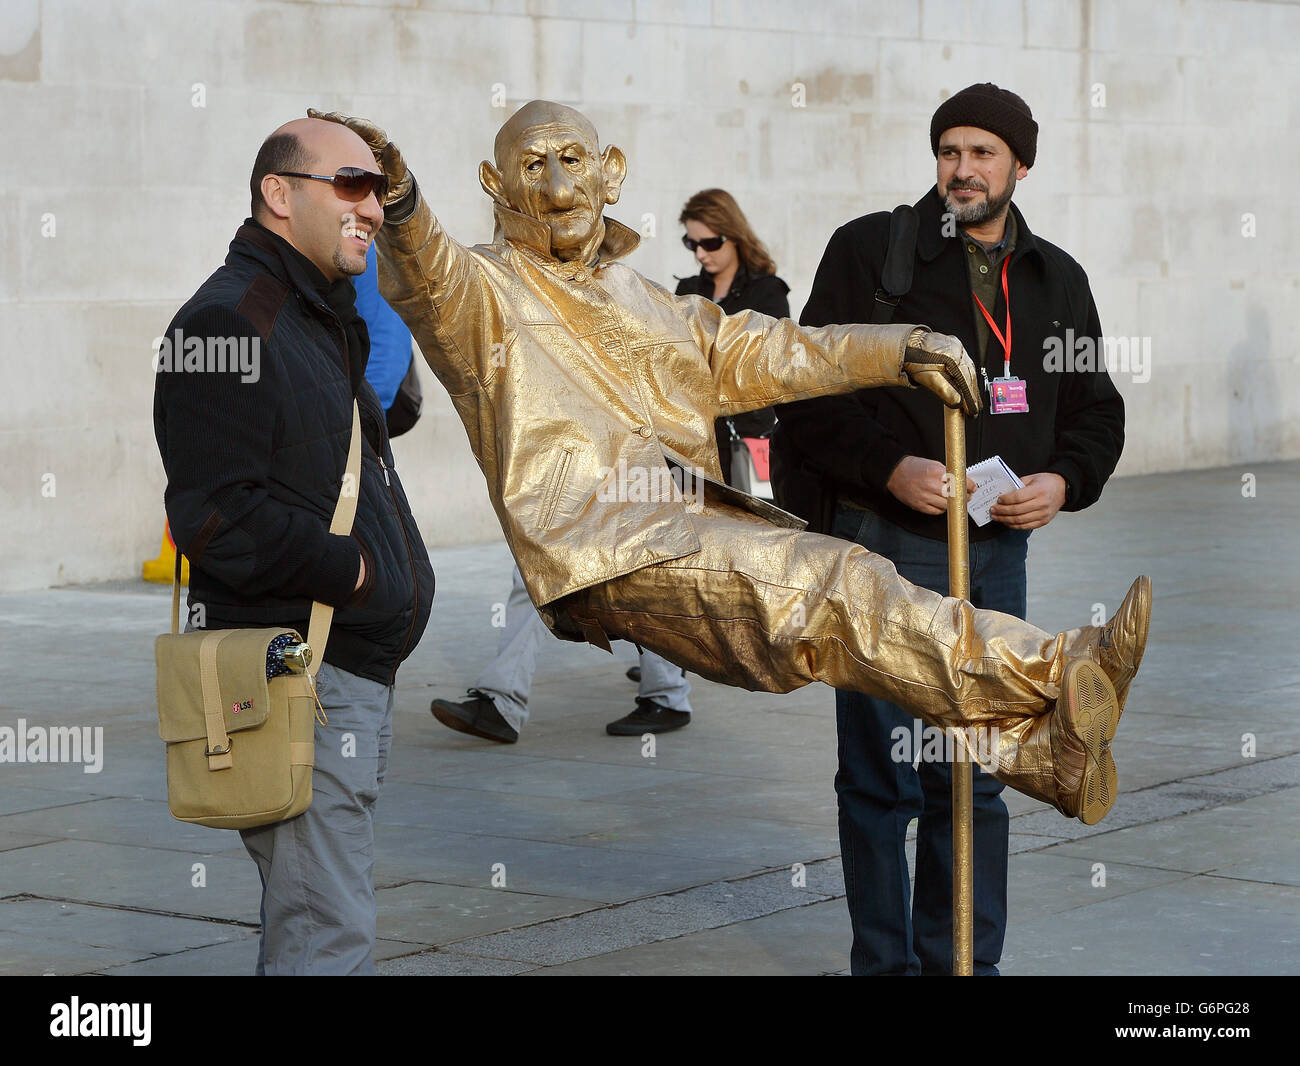 A human street Statue entertains tourists outside the National Gallery in Trafalgar Square, which was founded in 1824 and has a collection of 2,300 paintings dating from the mid-13th century 1900, and is a must visit attraction for foreign tourists visiting London. Stock Photo